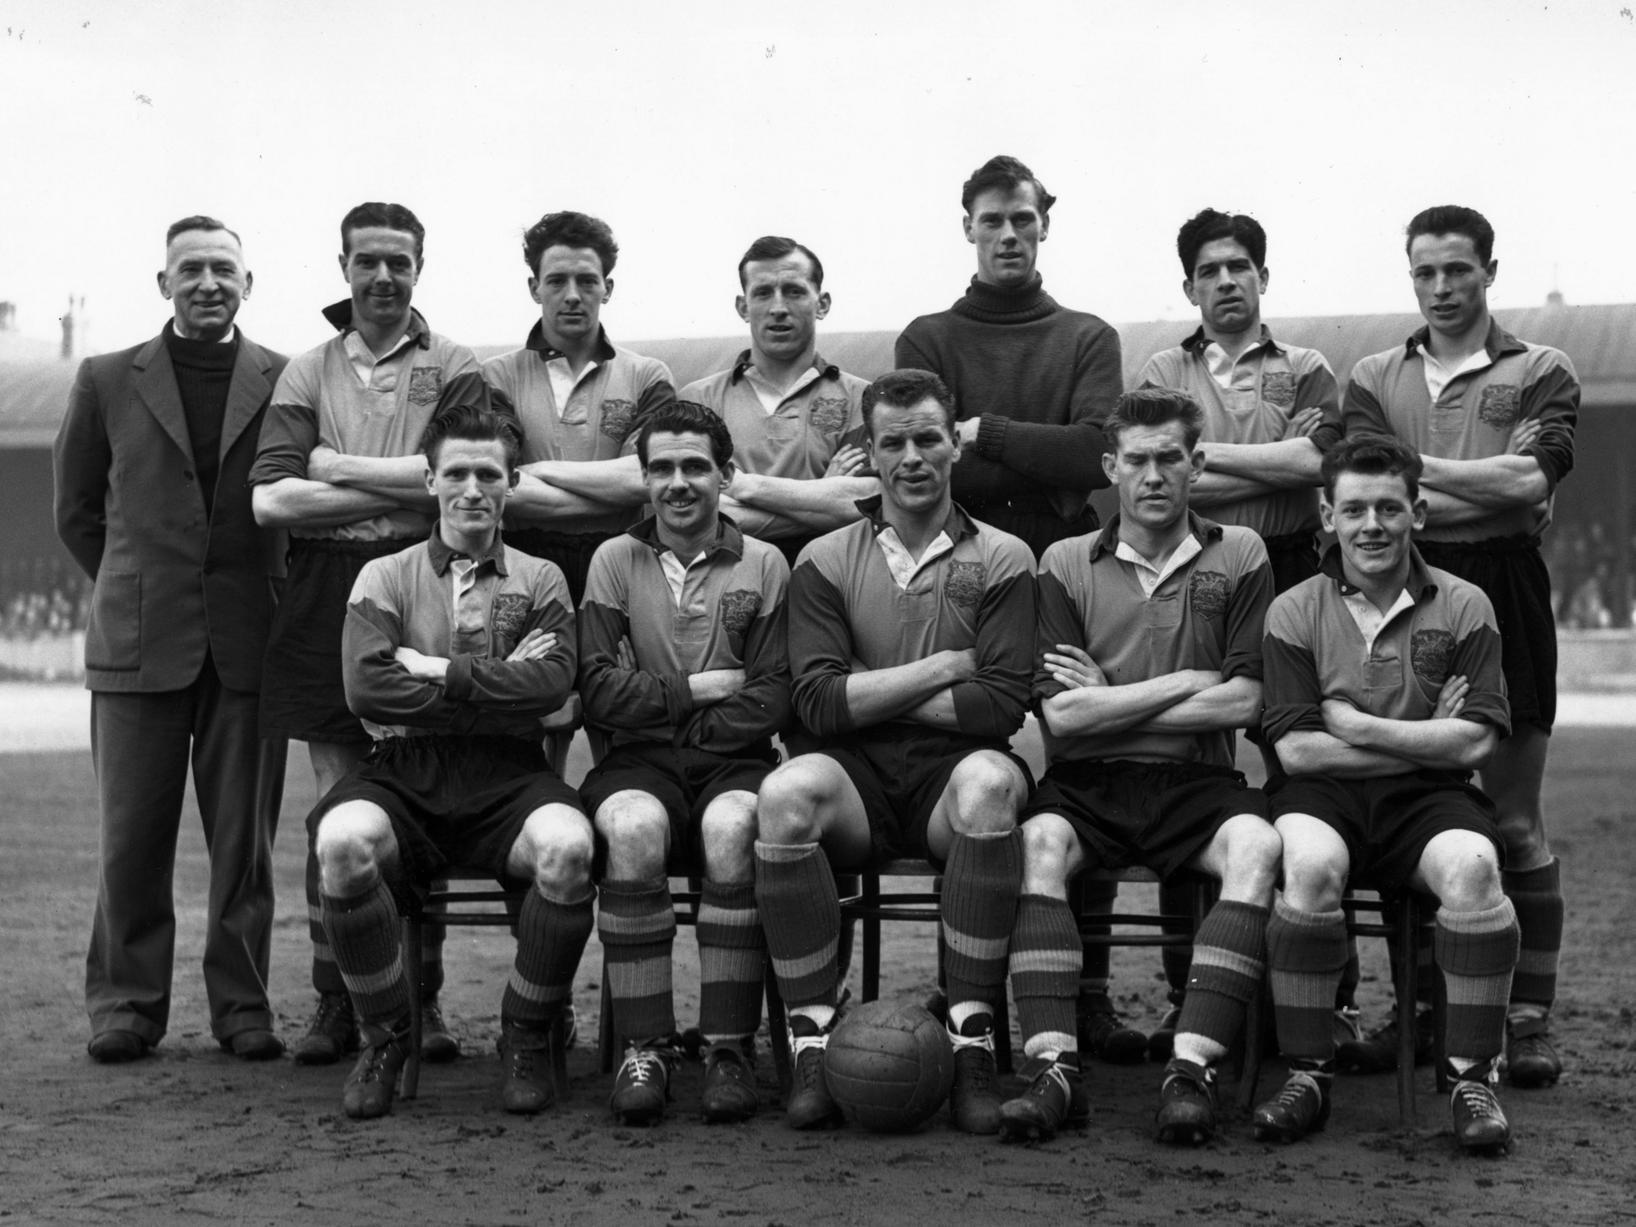 The goalkeeper (back, third from right) made 139 consecutive league appearances for Leeds United, as a team-mate of Jimmy Dunn's in the 1950s. He had one league game off in 179 Leeds fixtures.